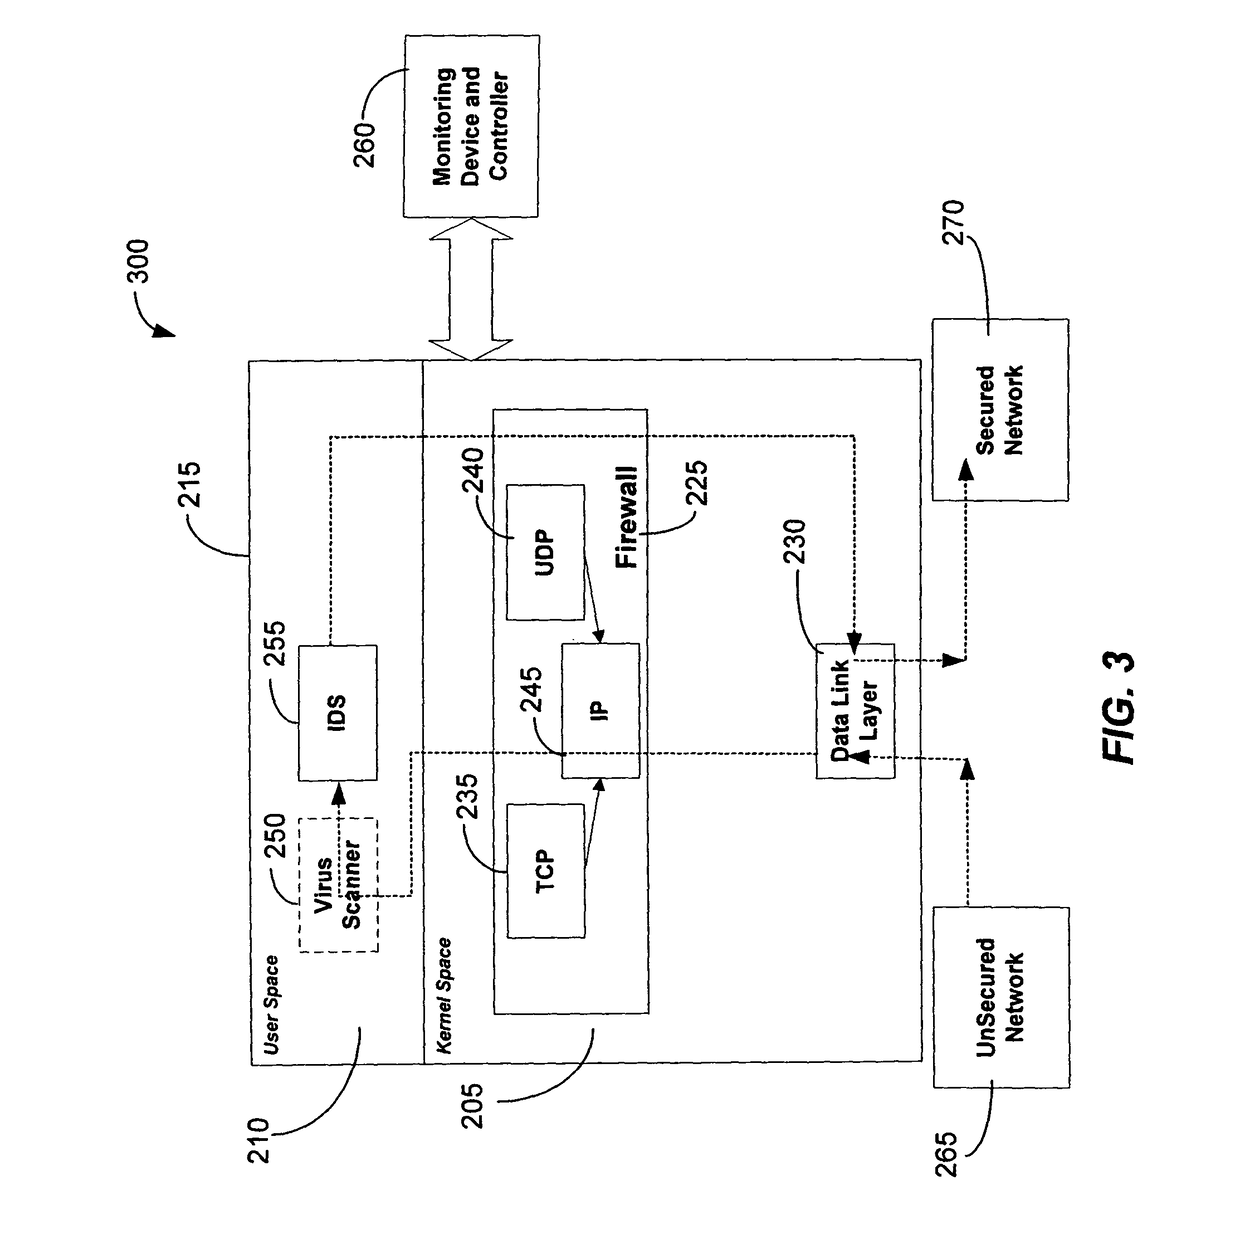 Integrated computer security management system and method